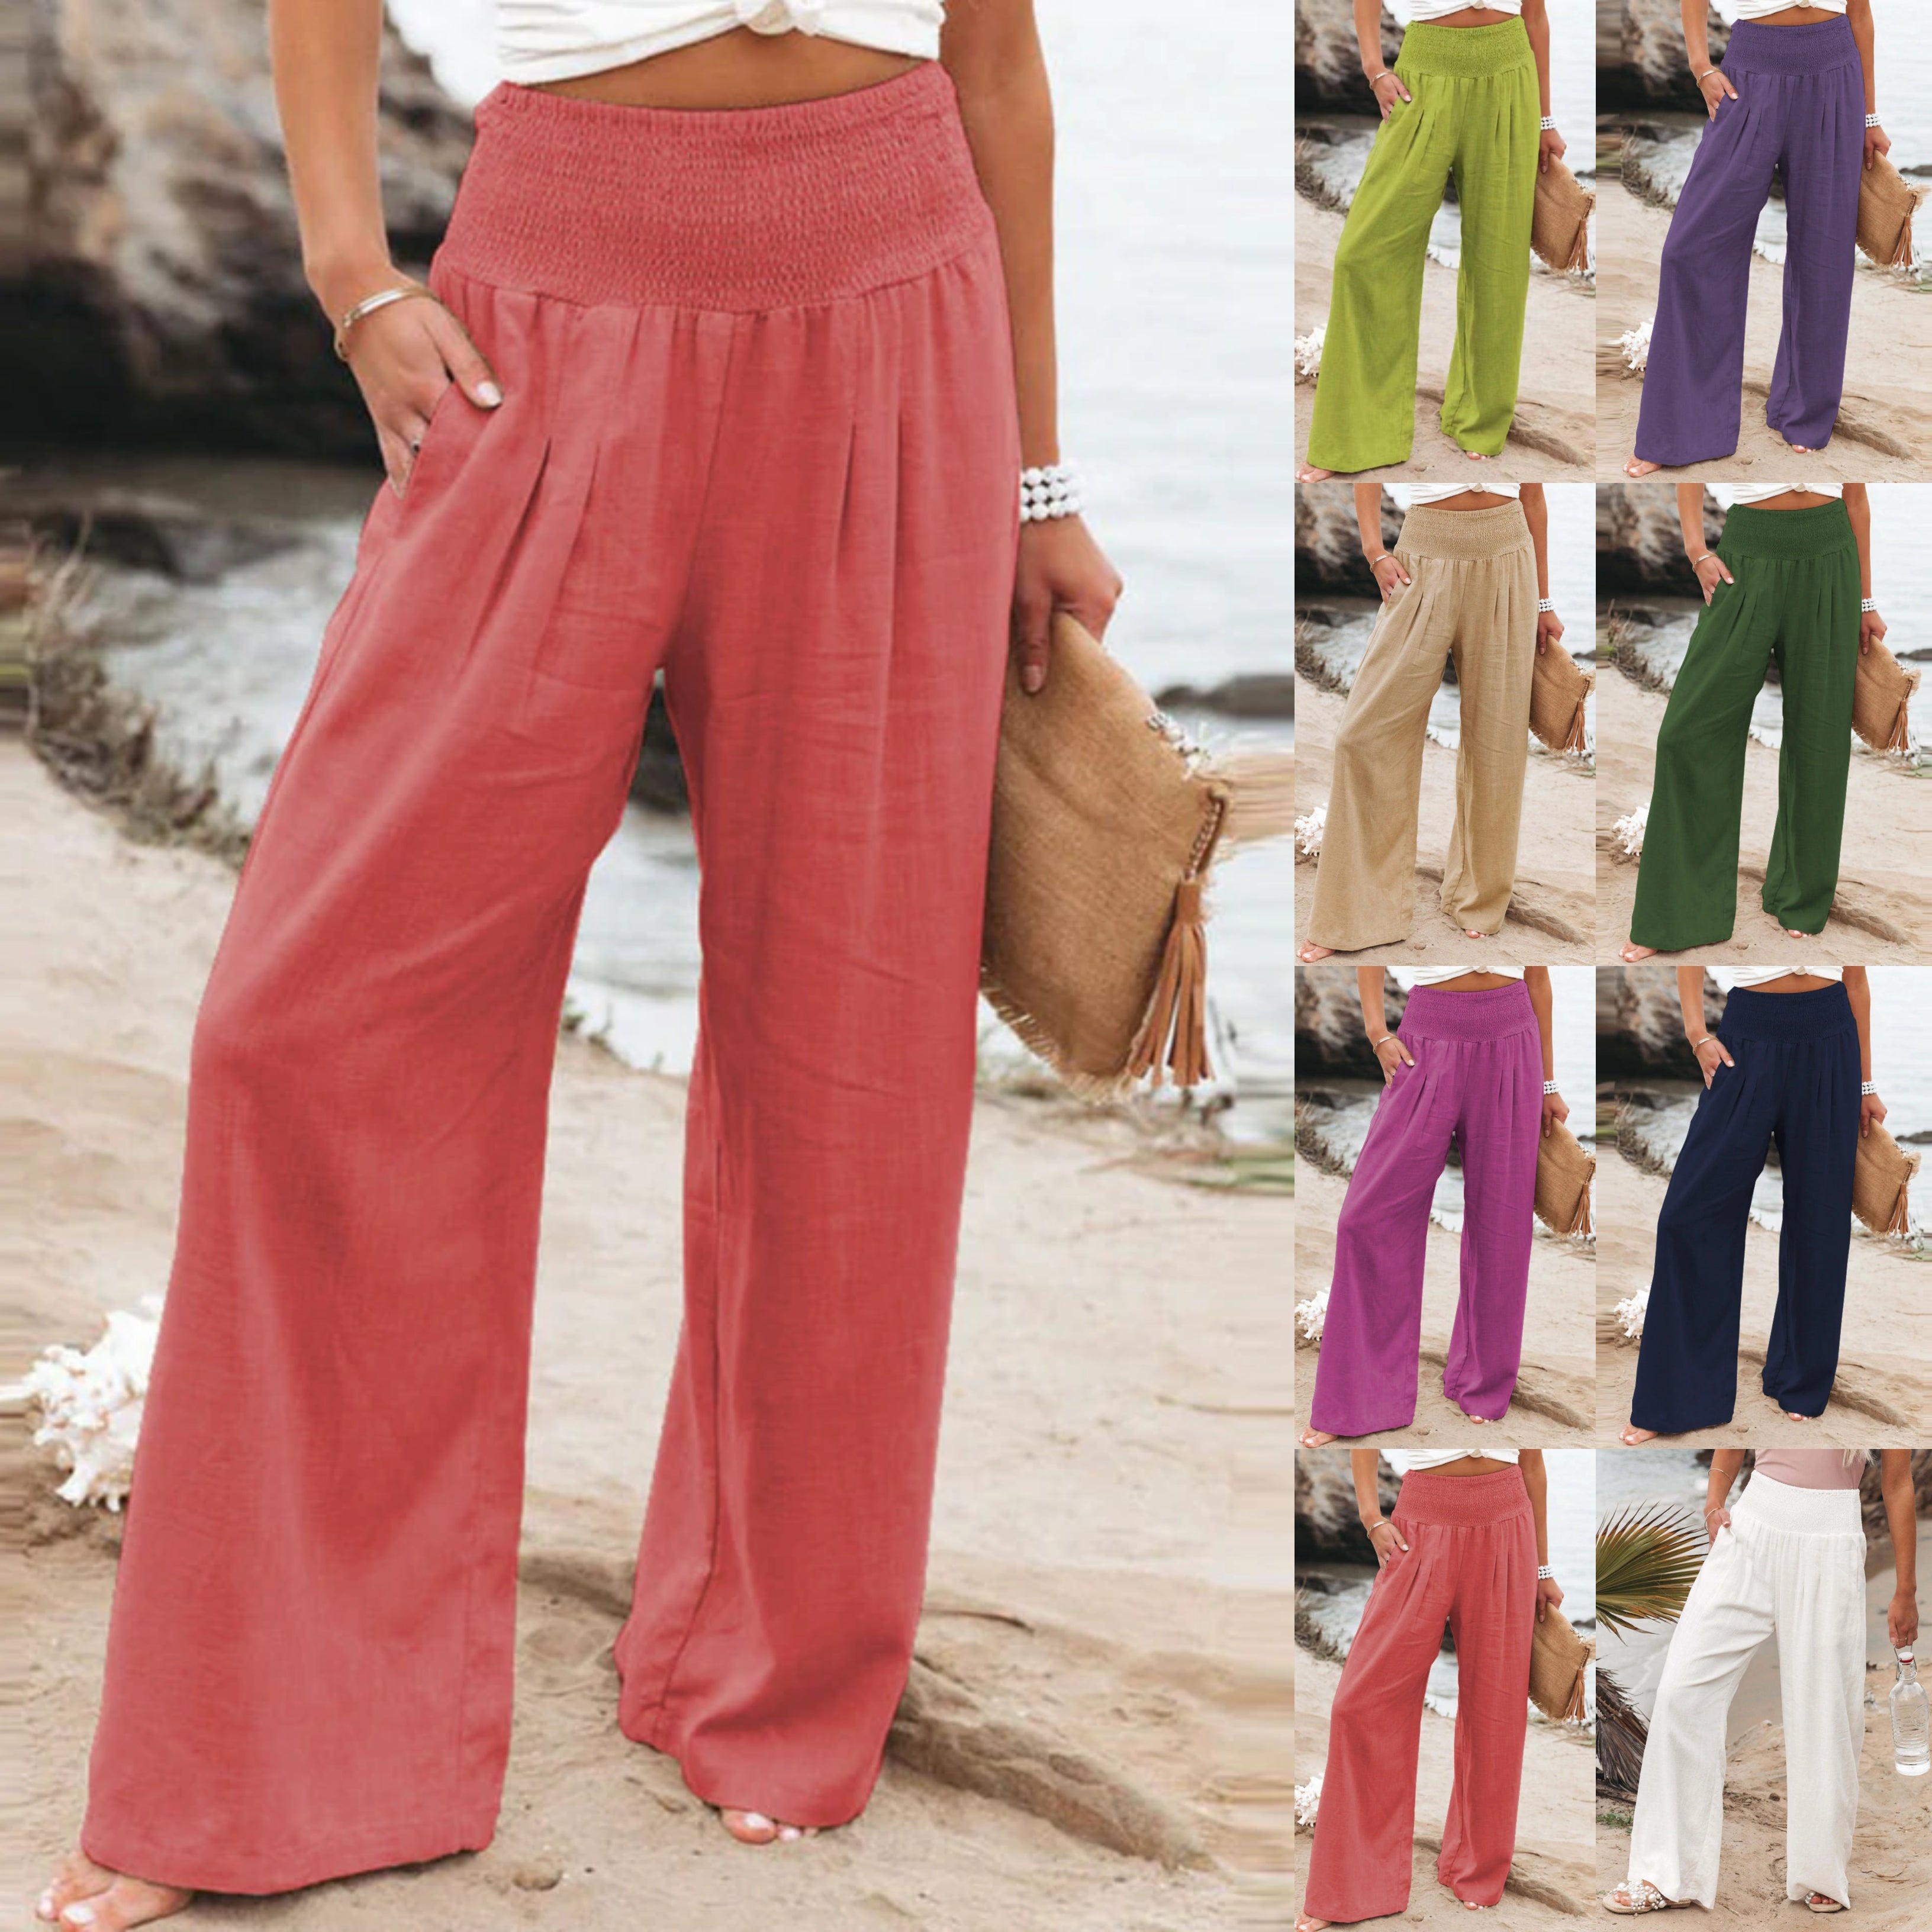 Buy Women's Fashion Pants and Jeans Online | MODA